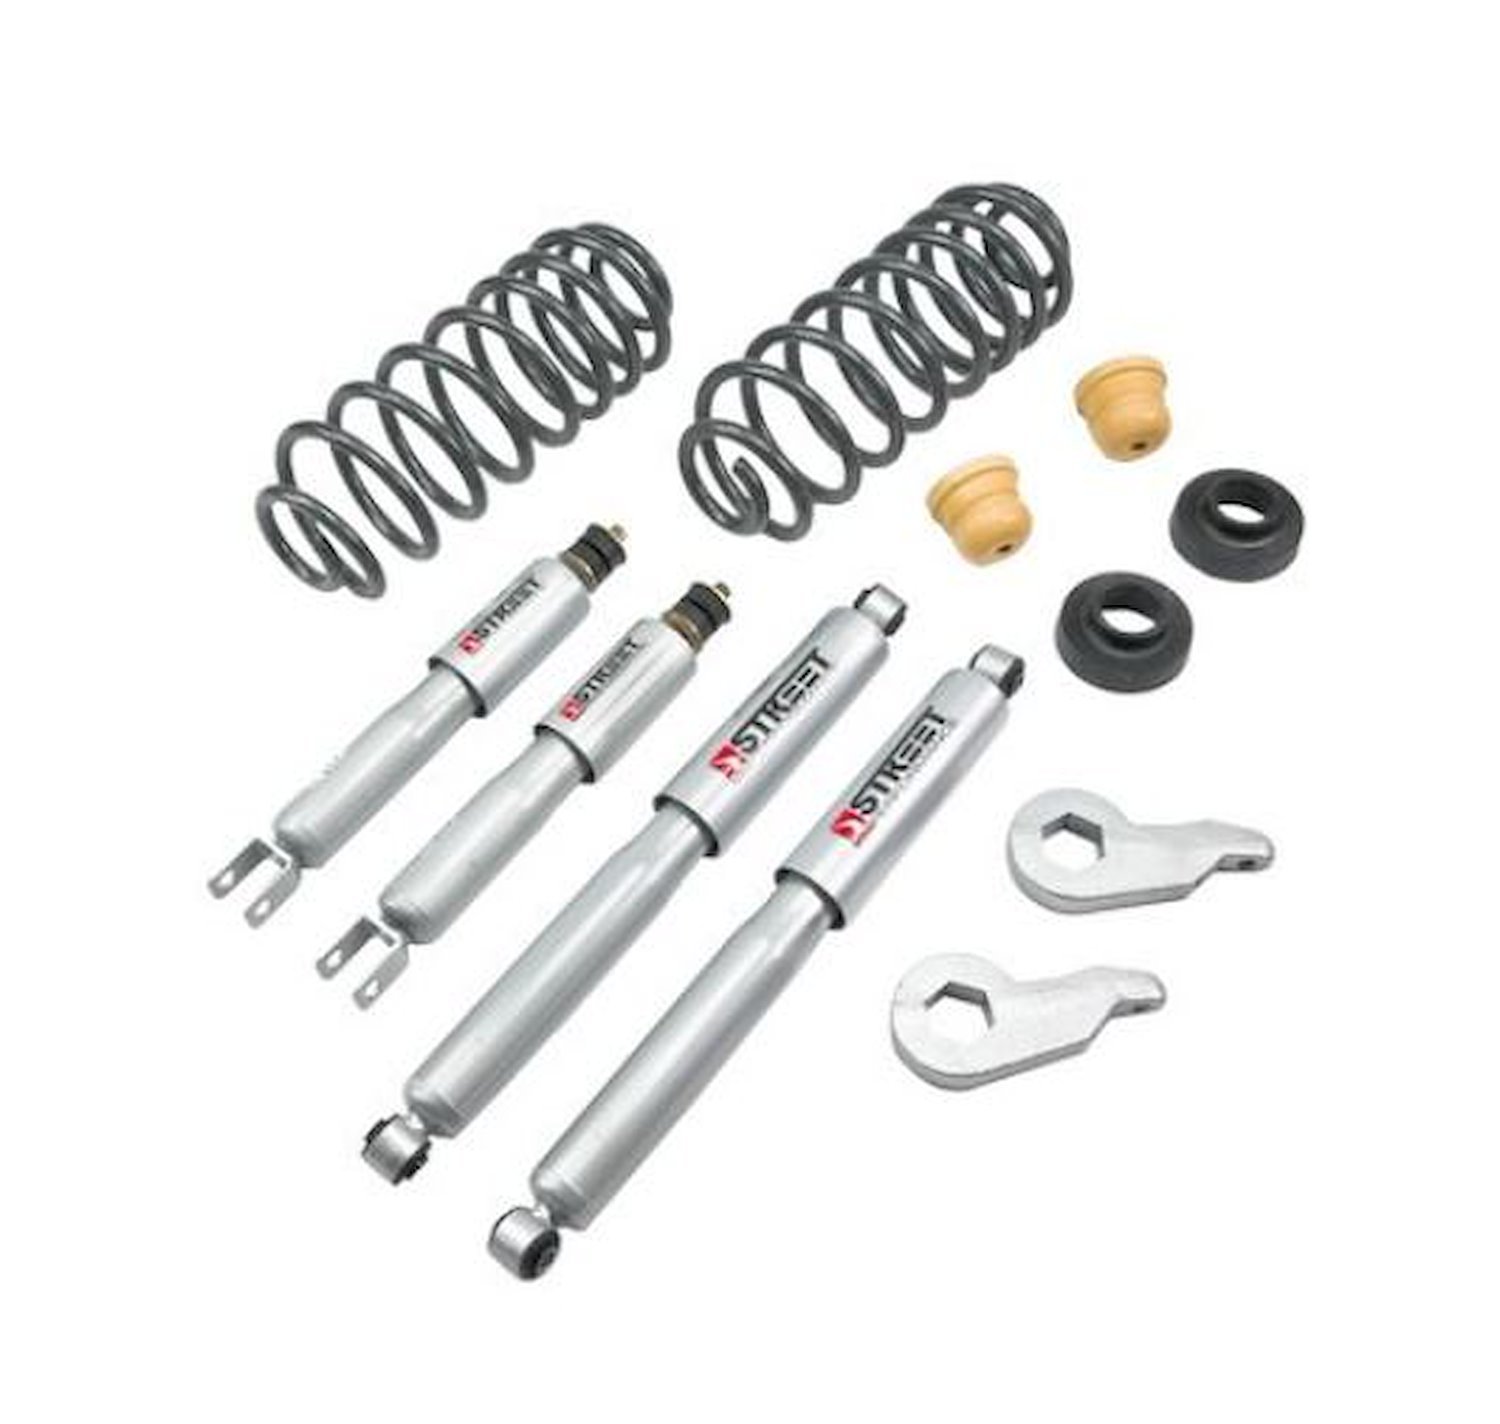 Lowering Kit with Street Performance Shocks for 2000-2006 Chevy Tahoe/Avalanche & GMC Yukon